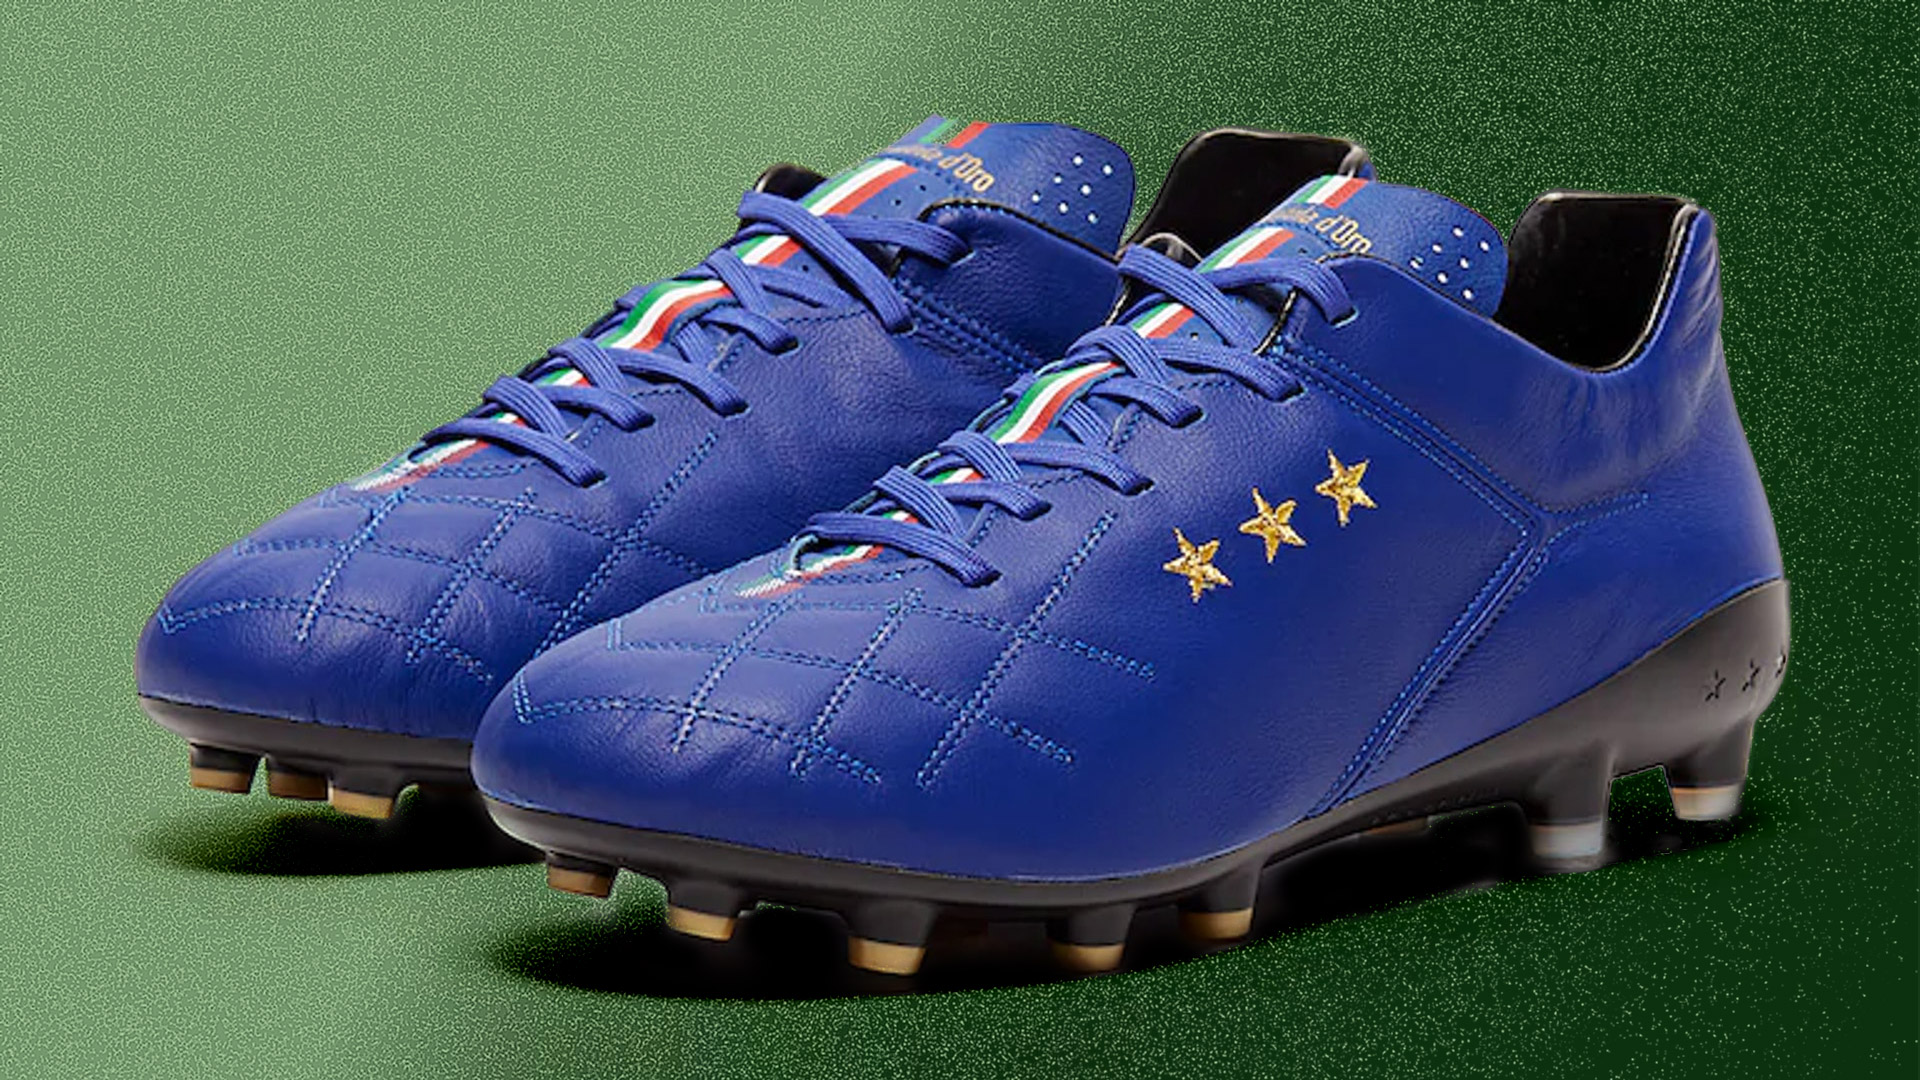 best football boots for strikers